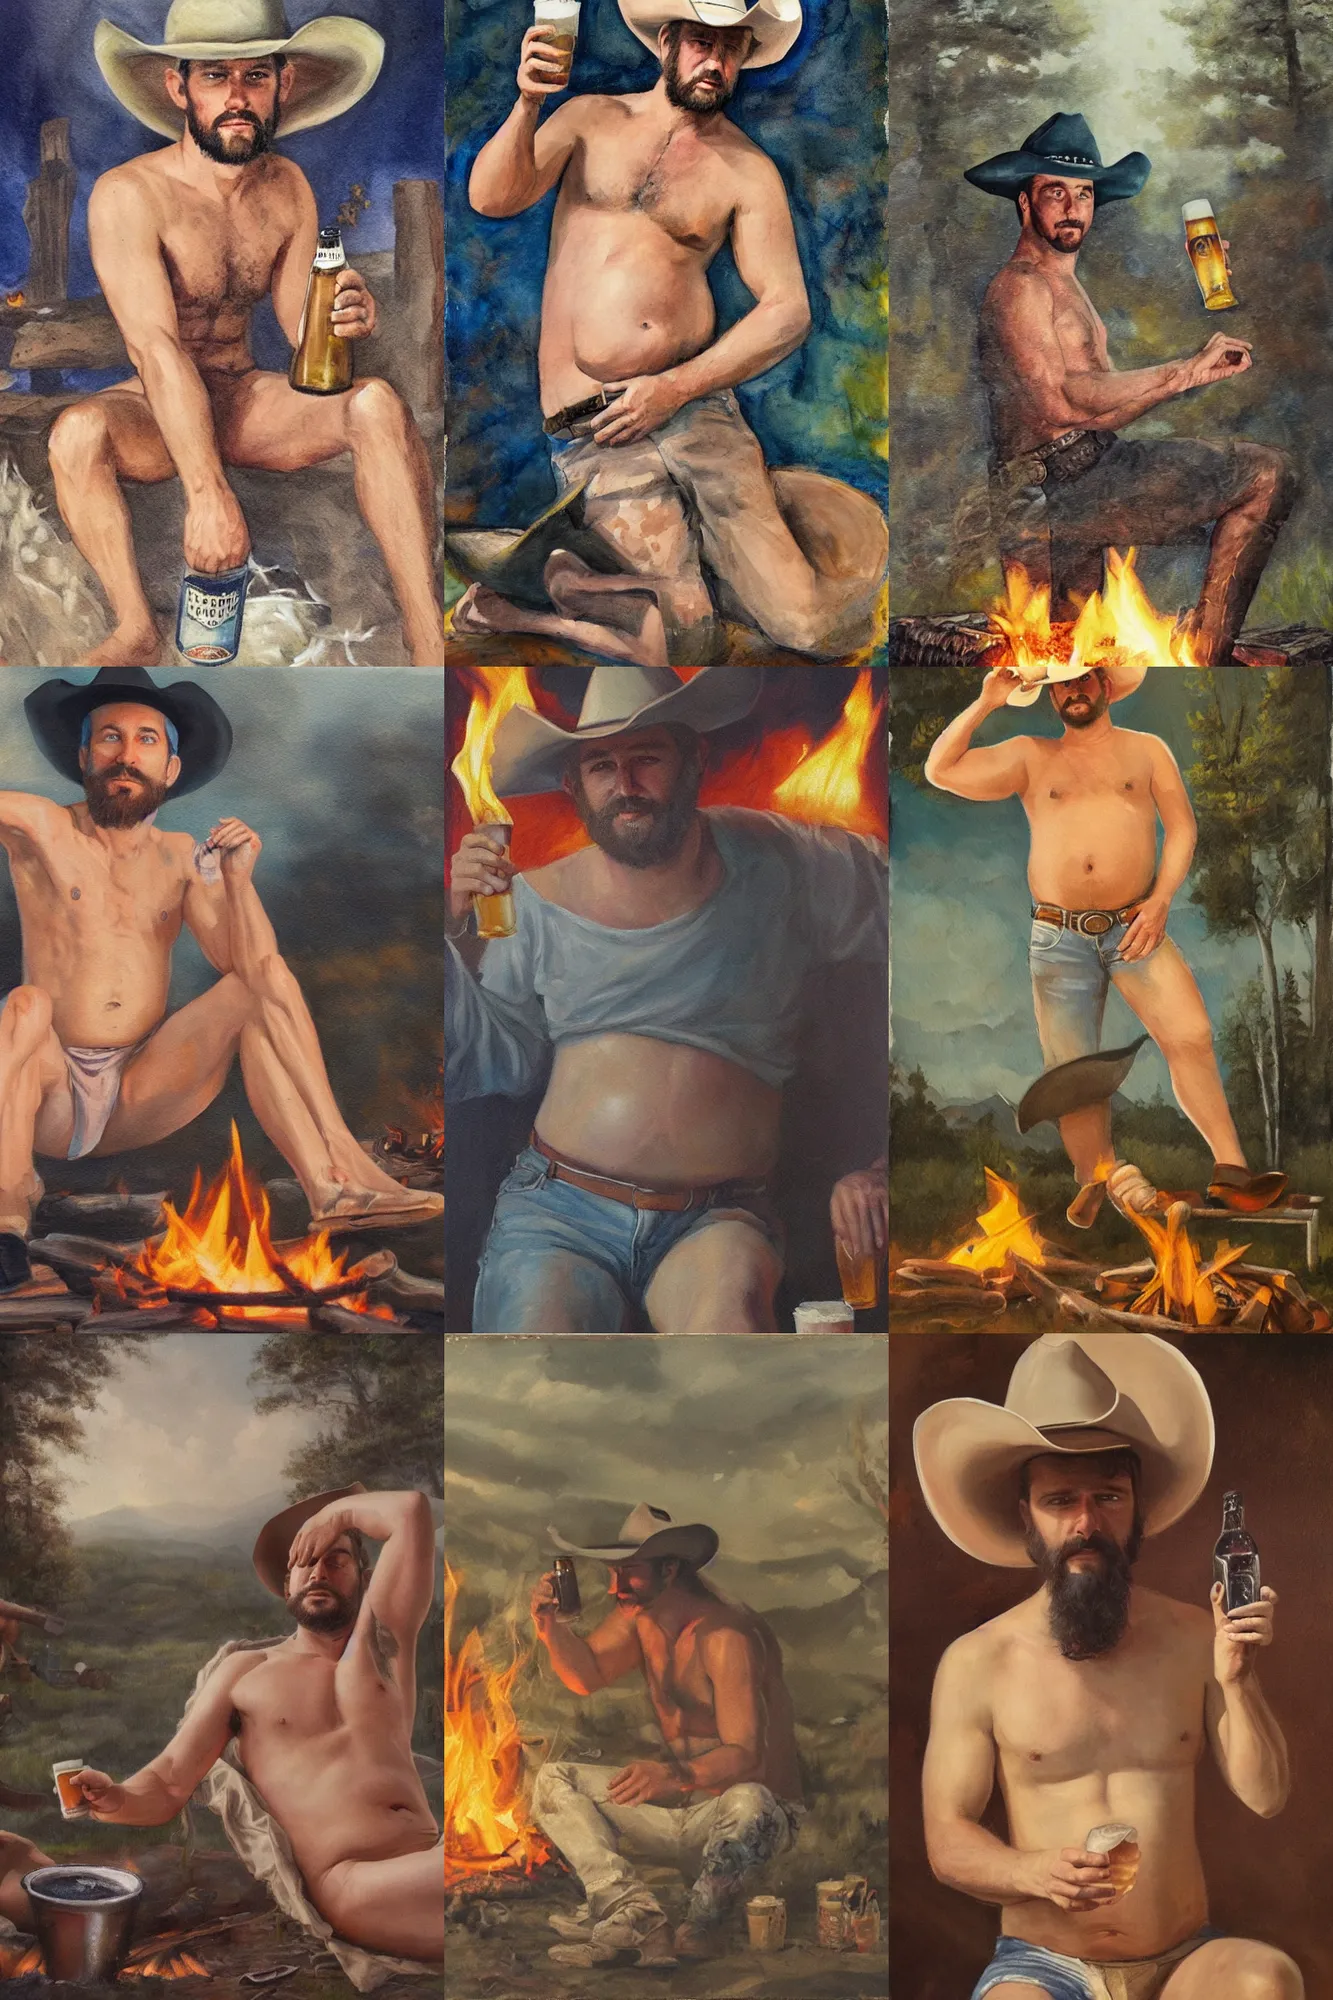 Prompt: an ethereal painting of a rugged handsome shirtless man with a beer belly and cowboy hat sitting by a campfire